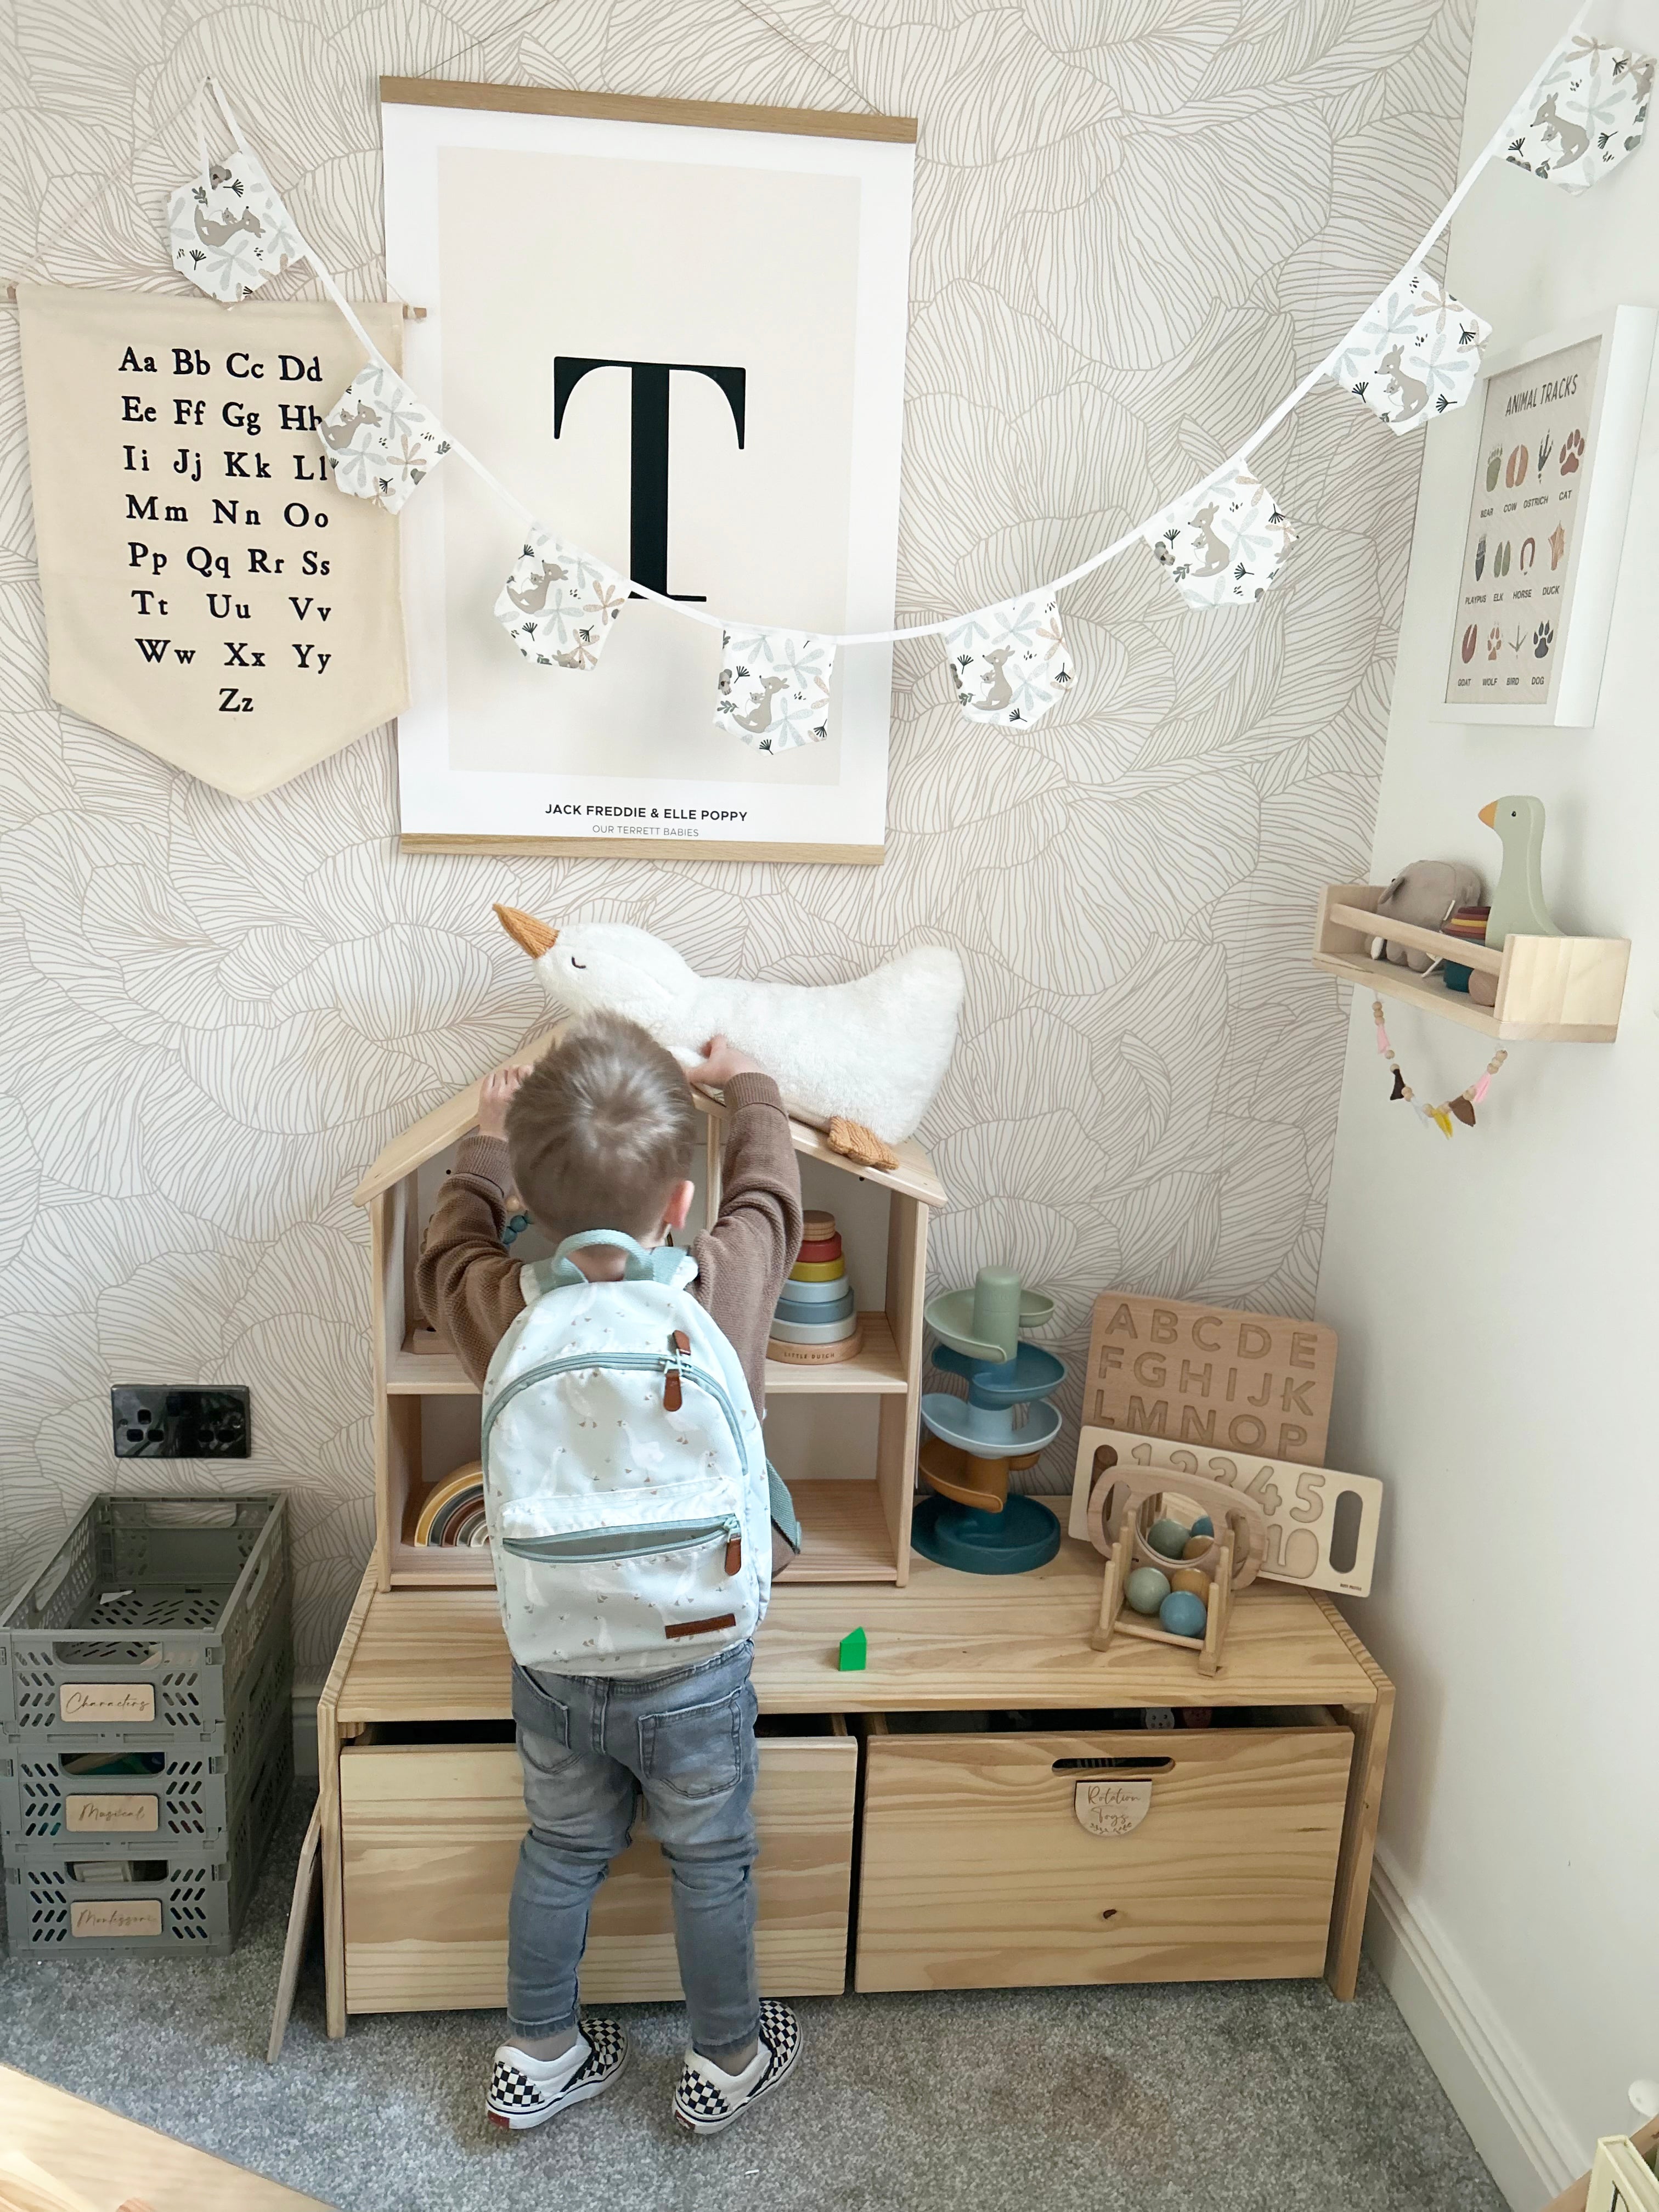 My Nursery room Is Where I Love To Play. I love to decorate with beautiful accessories. Our bunting design has been made to suit their interior designs. Head over to view our entire collection 